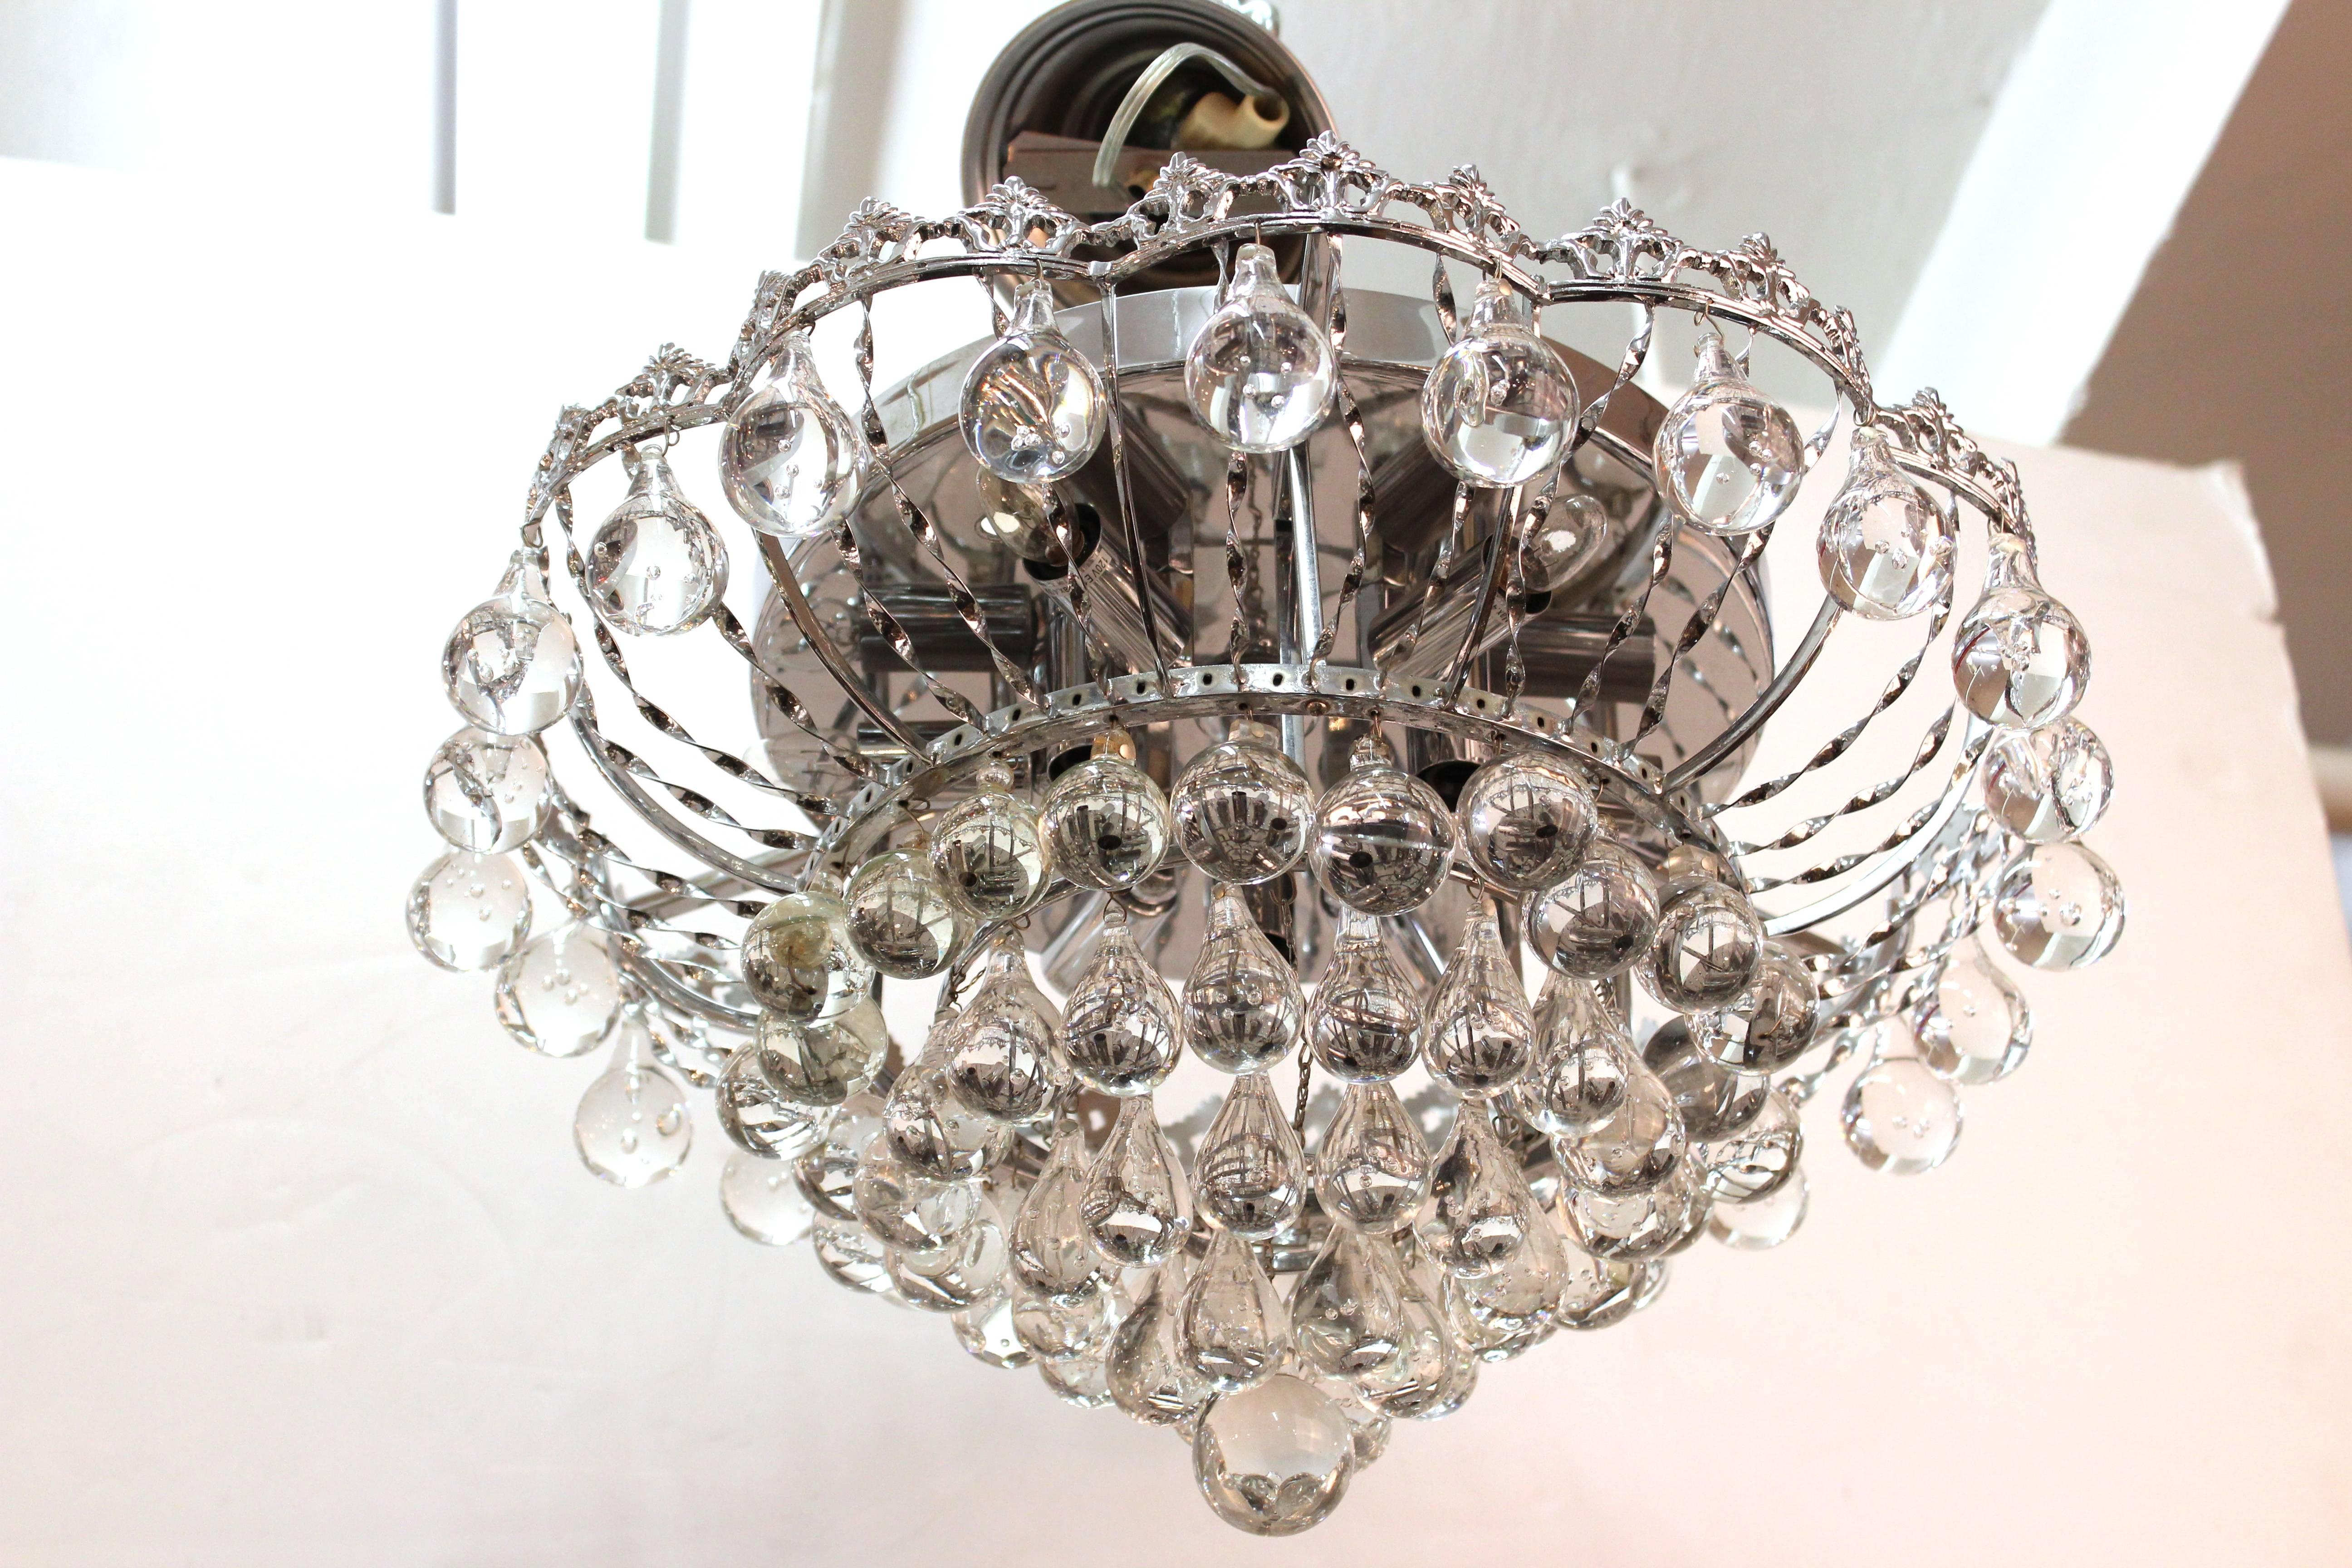 A Mid-Century Modern chrome chandelier with dropped crystal balls throughout each level. This chandelier was made in Italy in the 1950s and has recently been re-wired to conform with US standards. In excellent vintage condition.